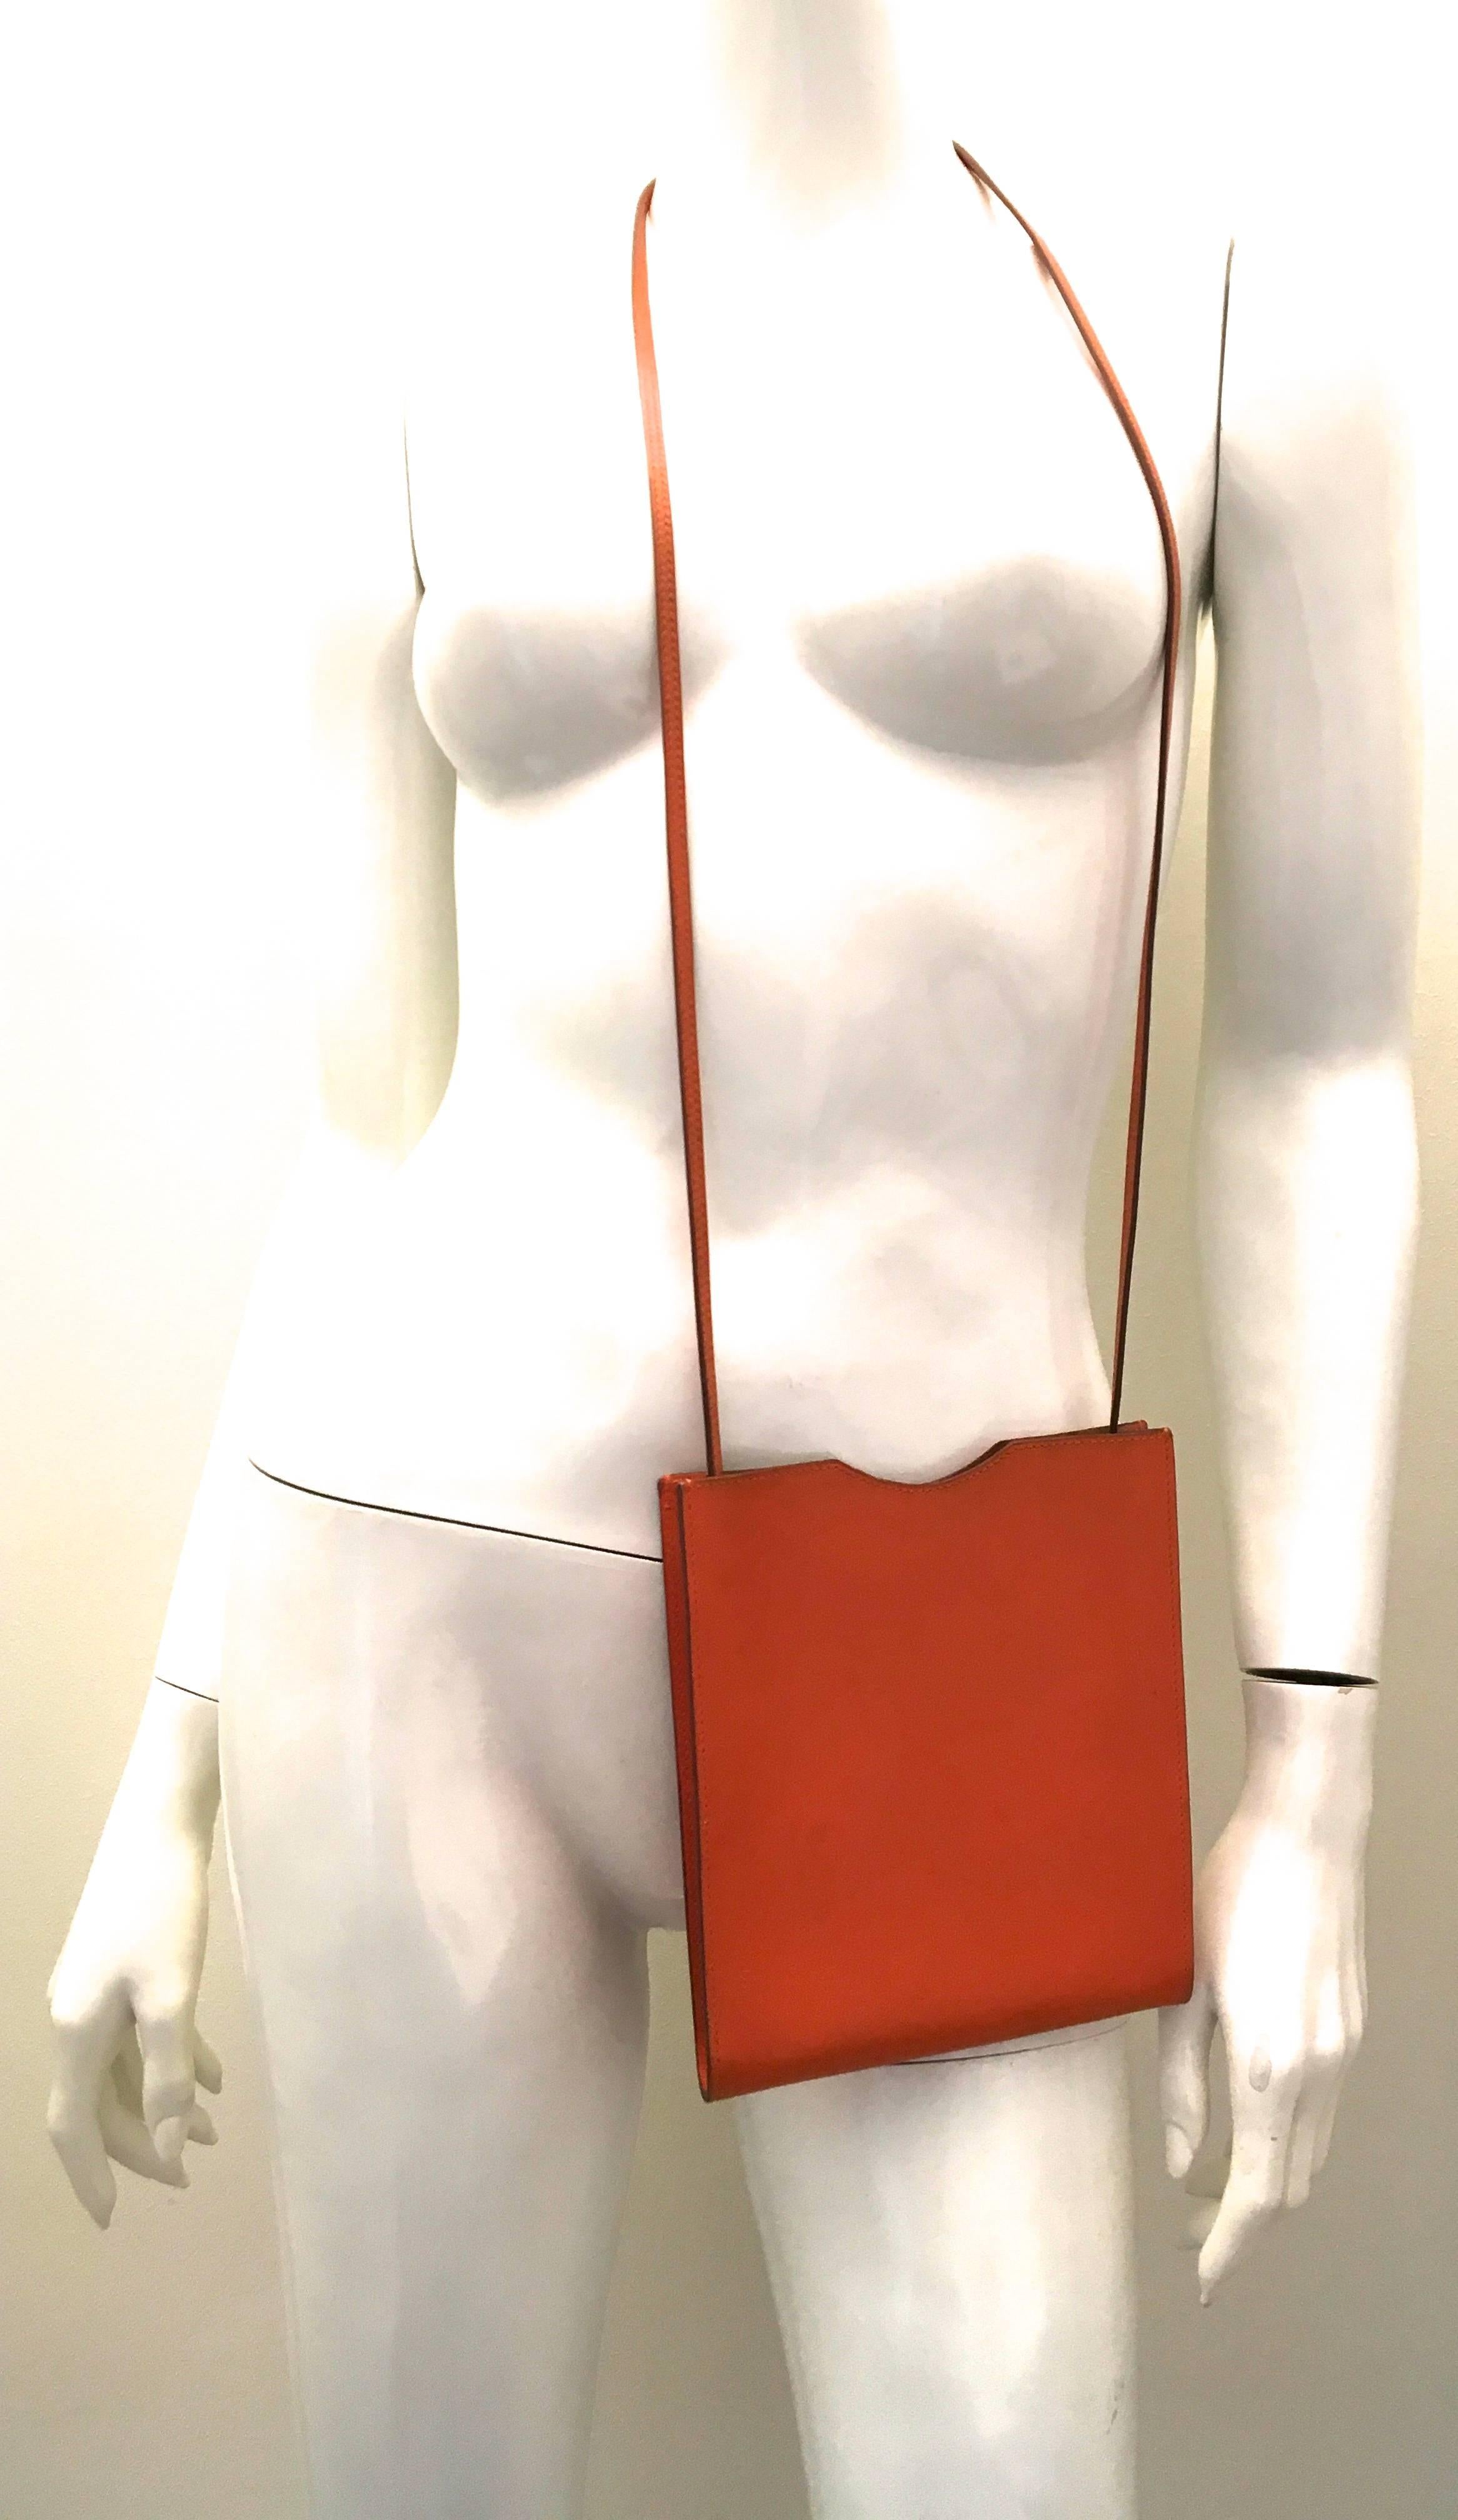 Presented here is a beautiful cross body purse from Hermes. The bag is a singular leather pouch that has one compartment with sufficient room for basic essentials. The soft grain of leather is a rich orange color. The bag is in excellent condition